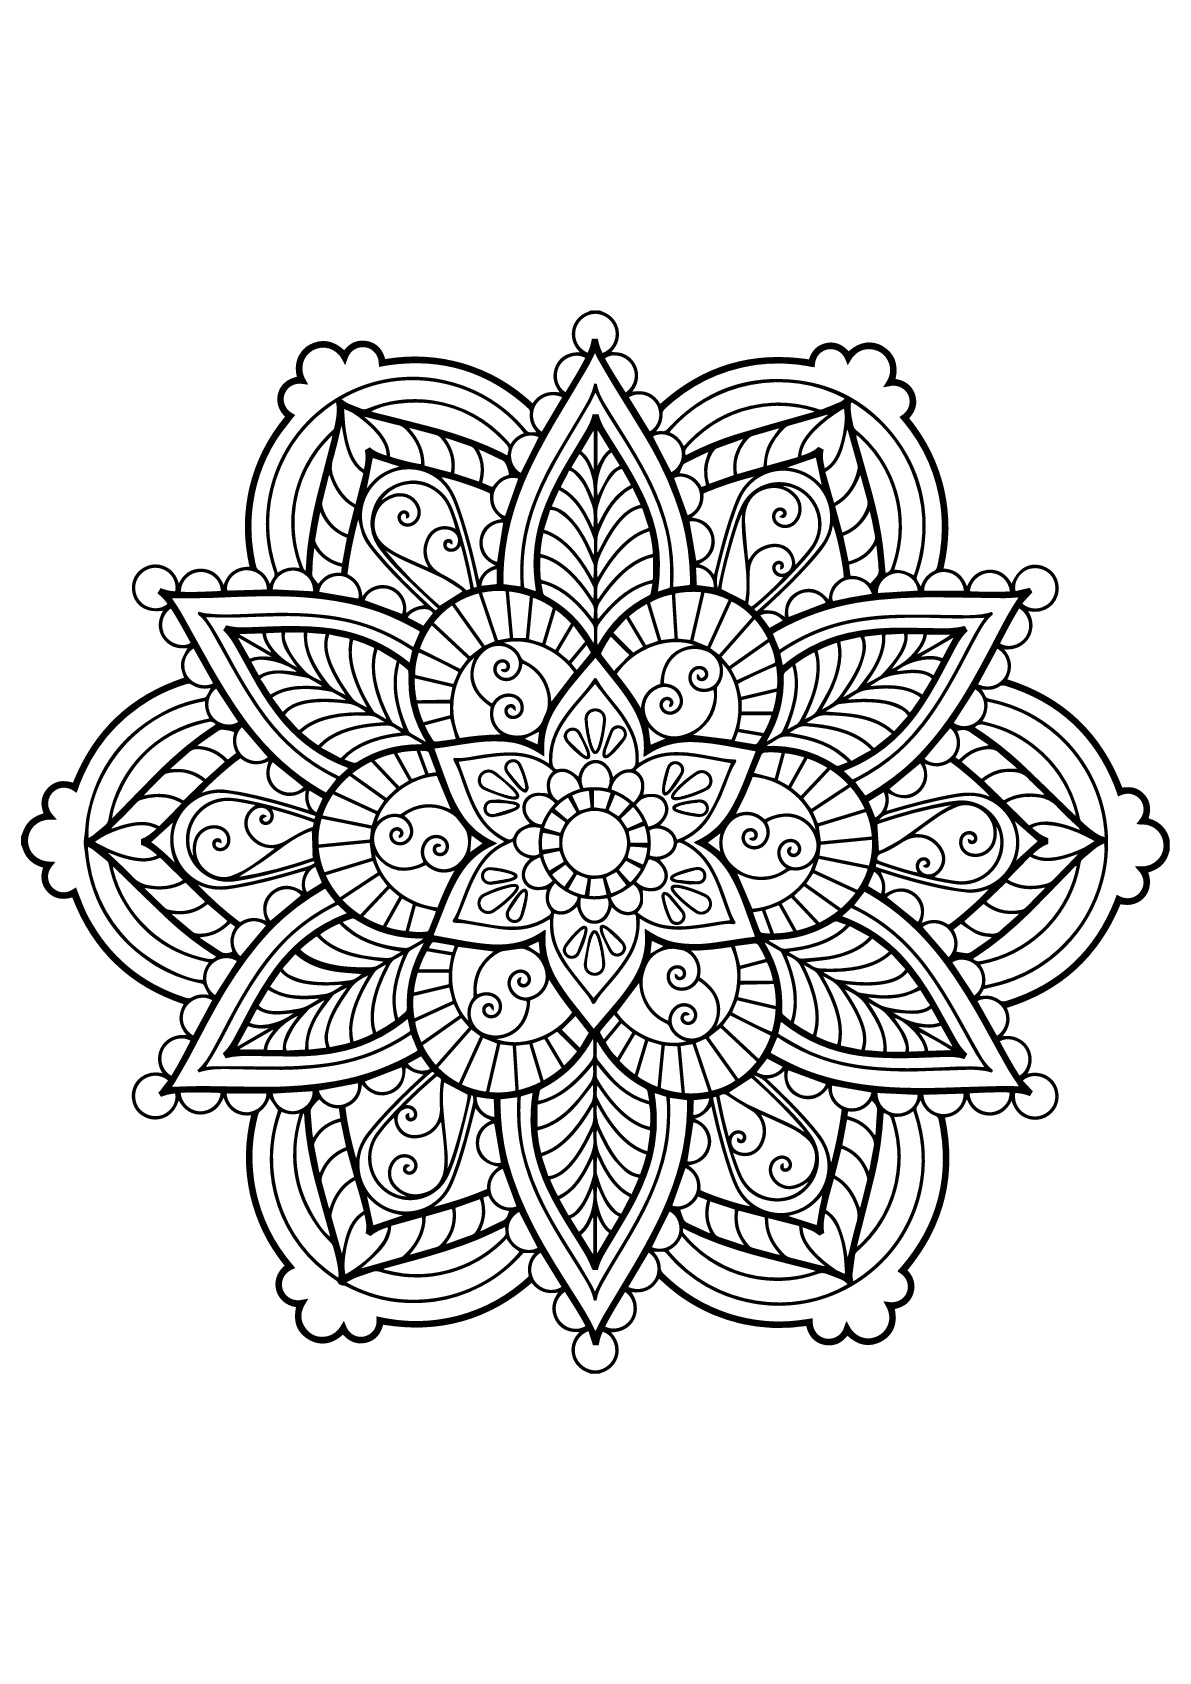 Download Mandala from free coloring books for adults 28 - M&alas ...